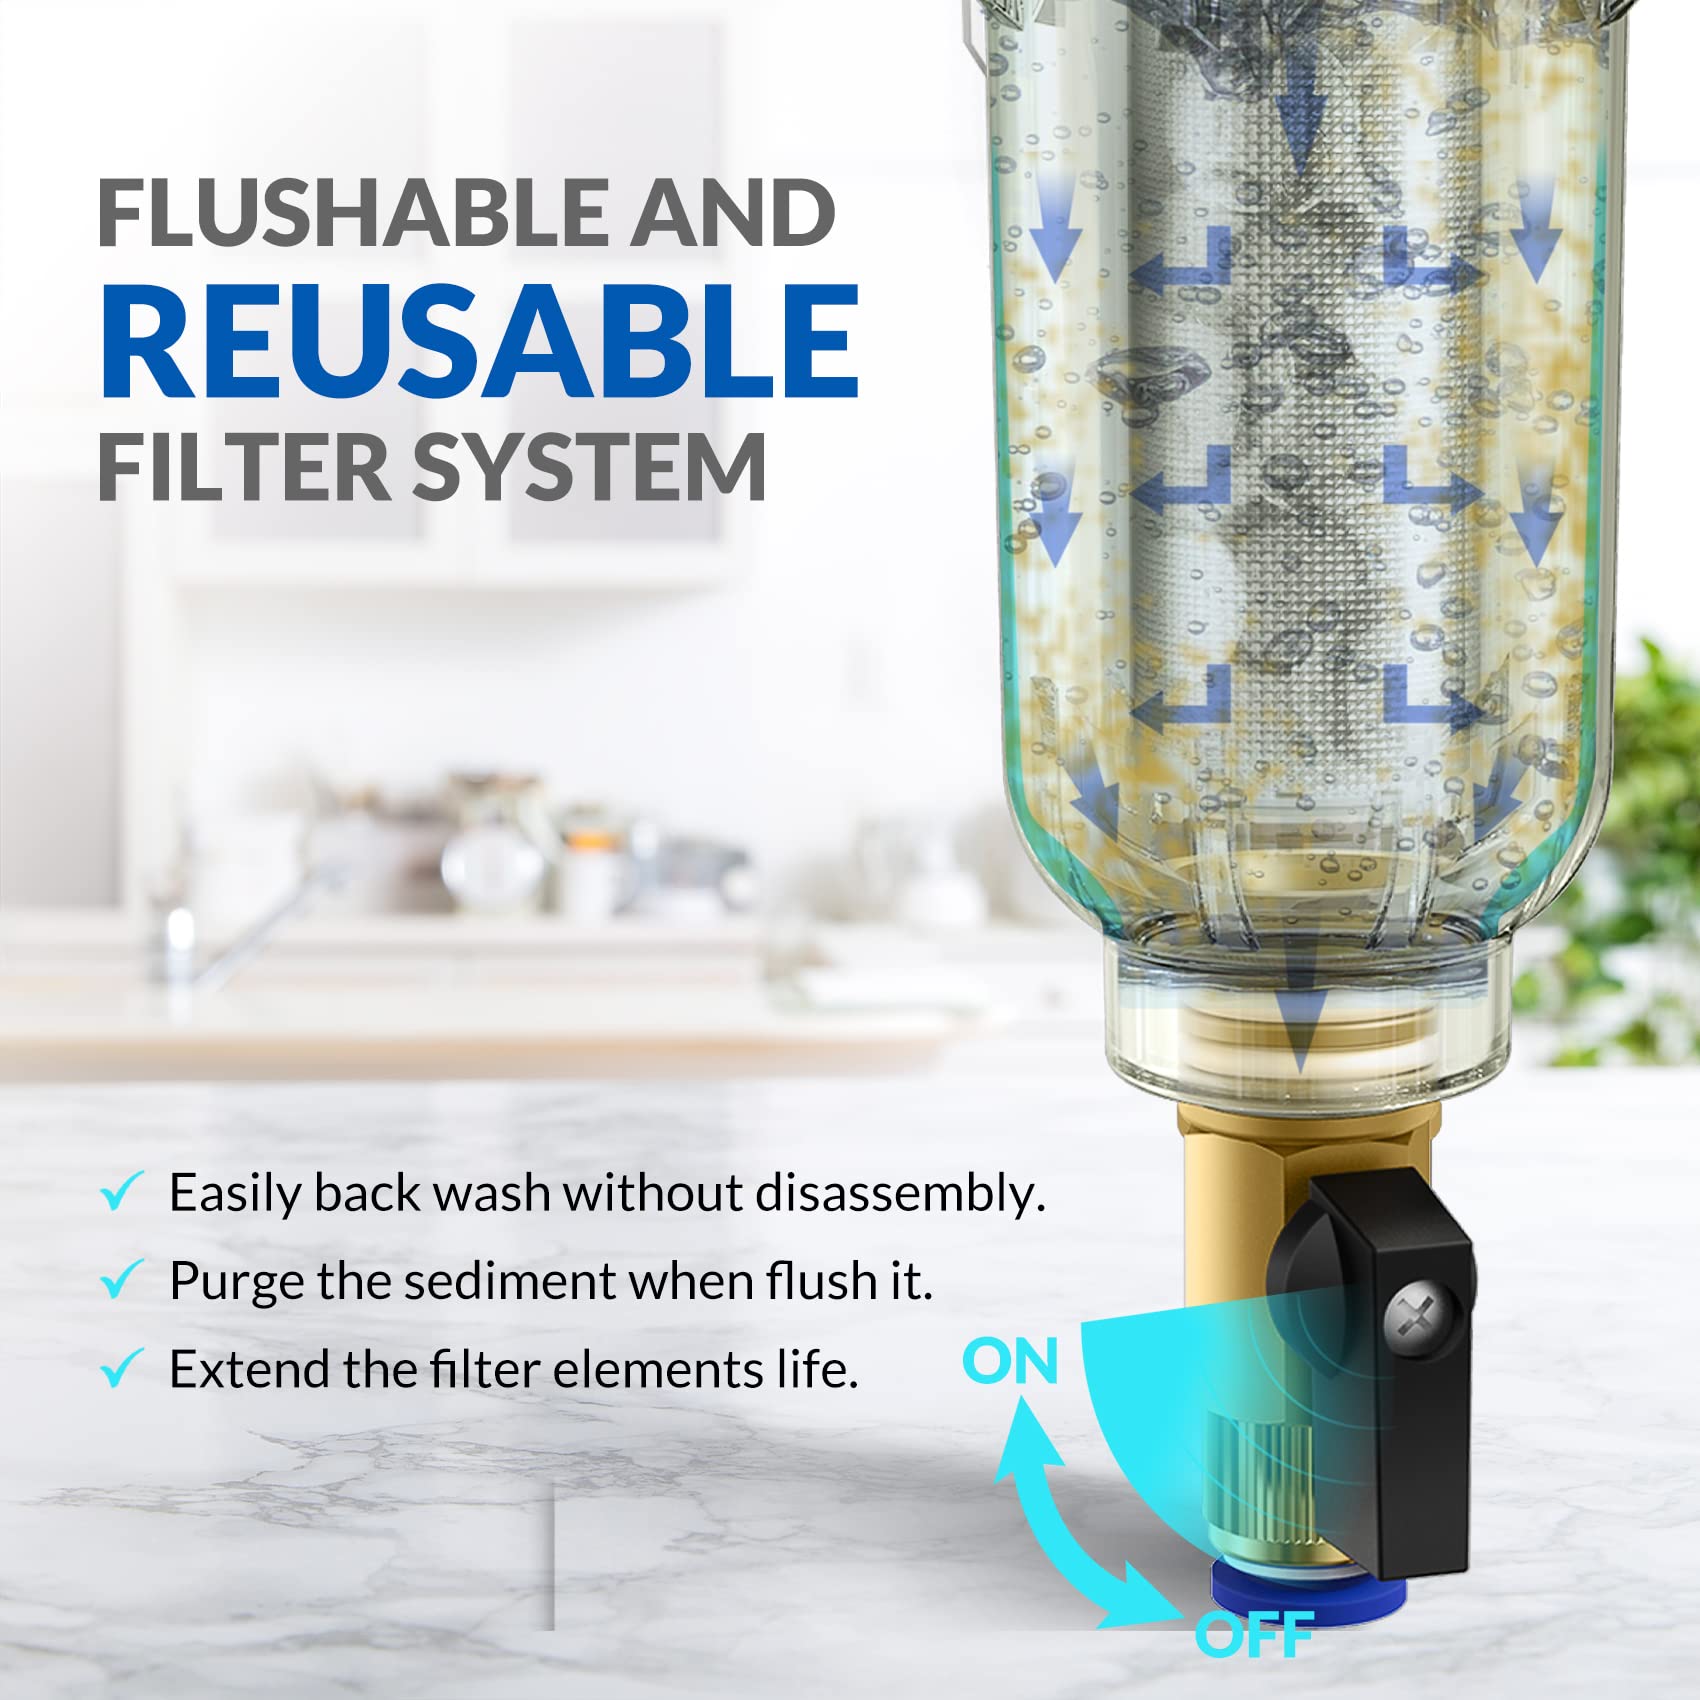 SimPure DC5S 40 Micron Spin Down Sediment Filter, Reusable Whole House Sediment Water Filter Softener with Siliphos Helps Prevent Scale and Corrosion, 1" MNPT + 3/4" FNPT + 3/4"MNPT, BPA Free